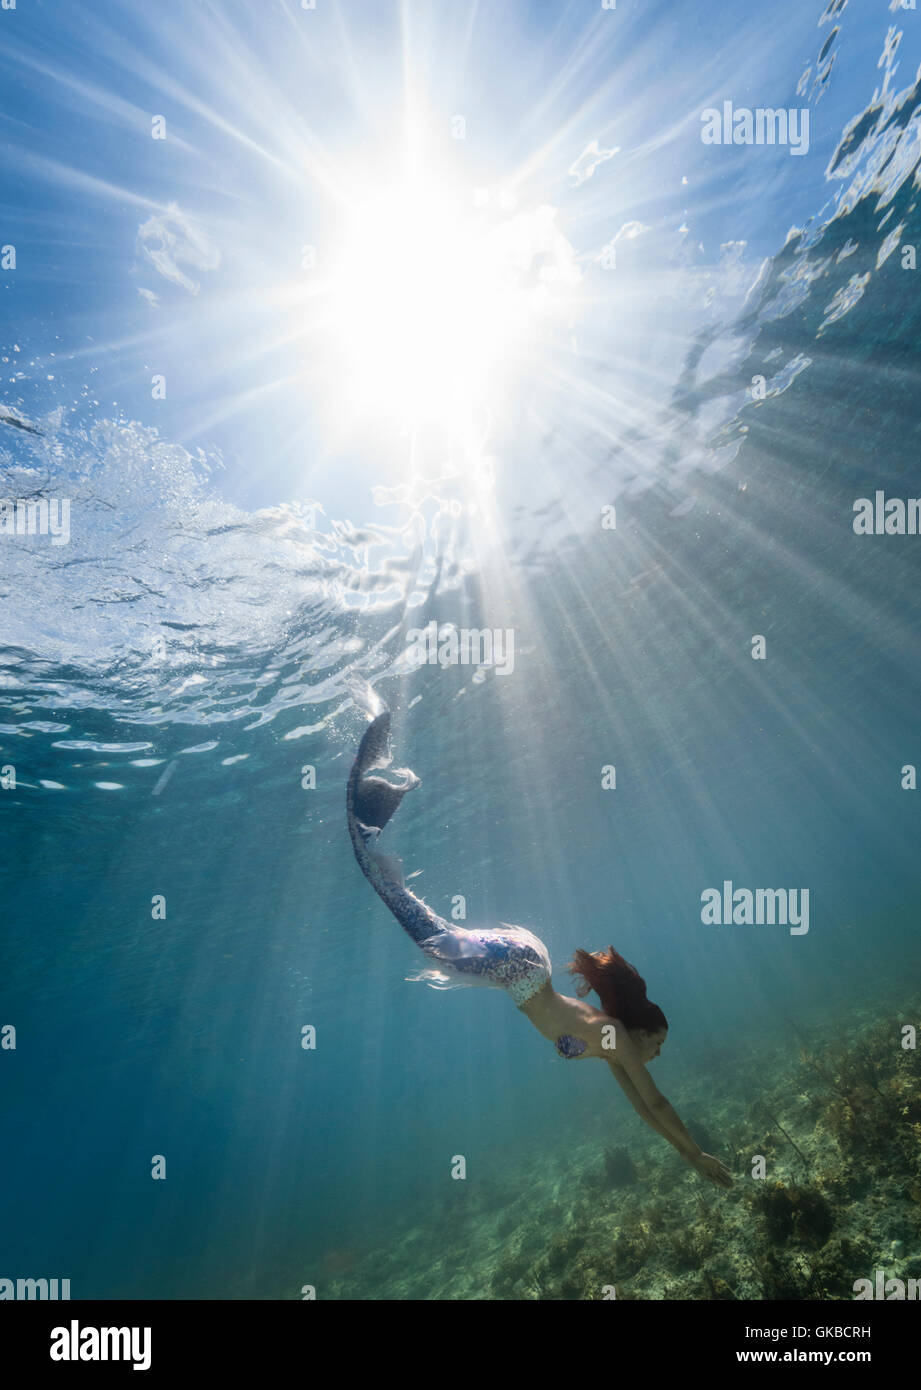 Mermaid swimming in the ocean with a starburst from the sun shining behind her, Shoud Cay, Exuma Cays, Bahamas Islands Stock Photo